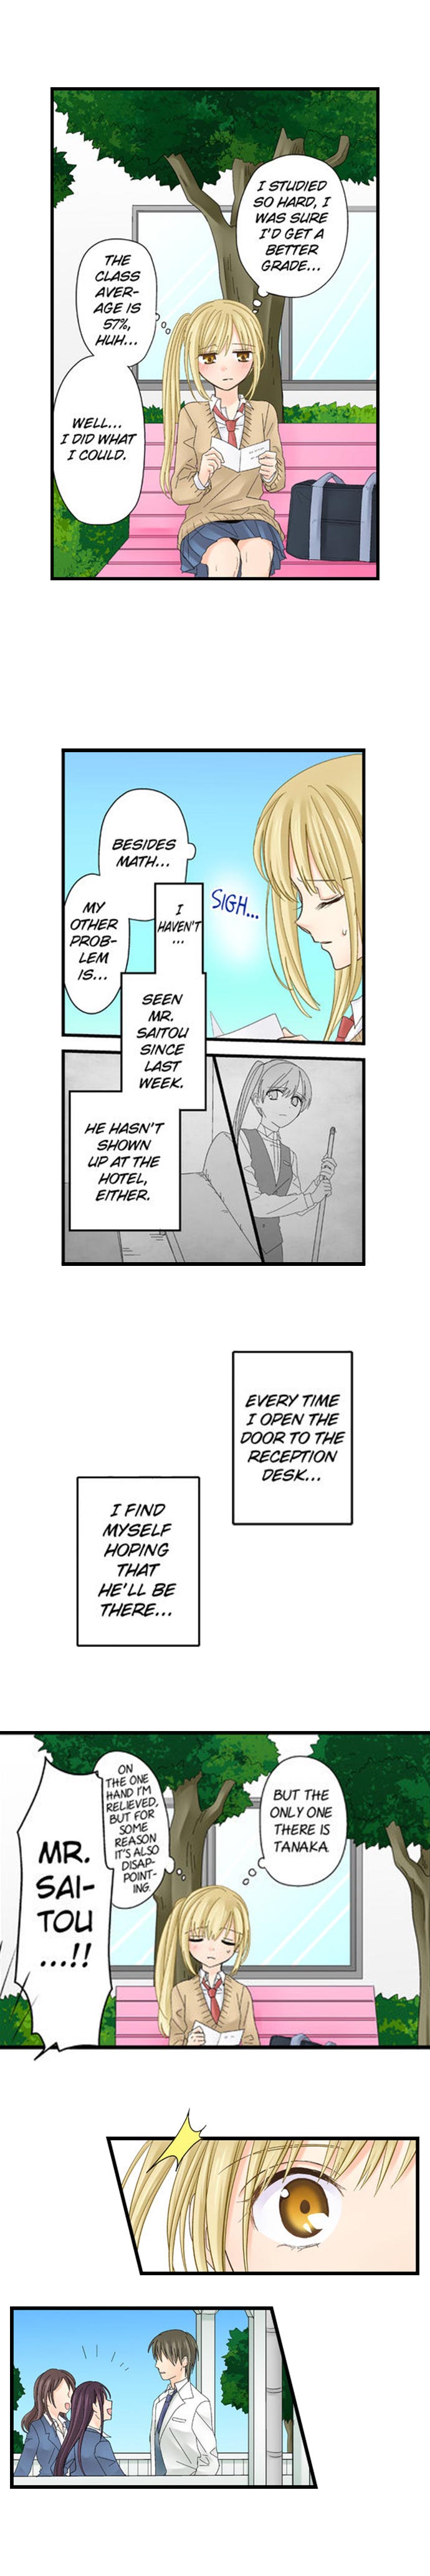 Running a Love Hotel with My Math Teacher - Chapter 15 Page 5